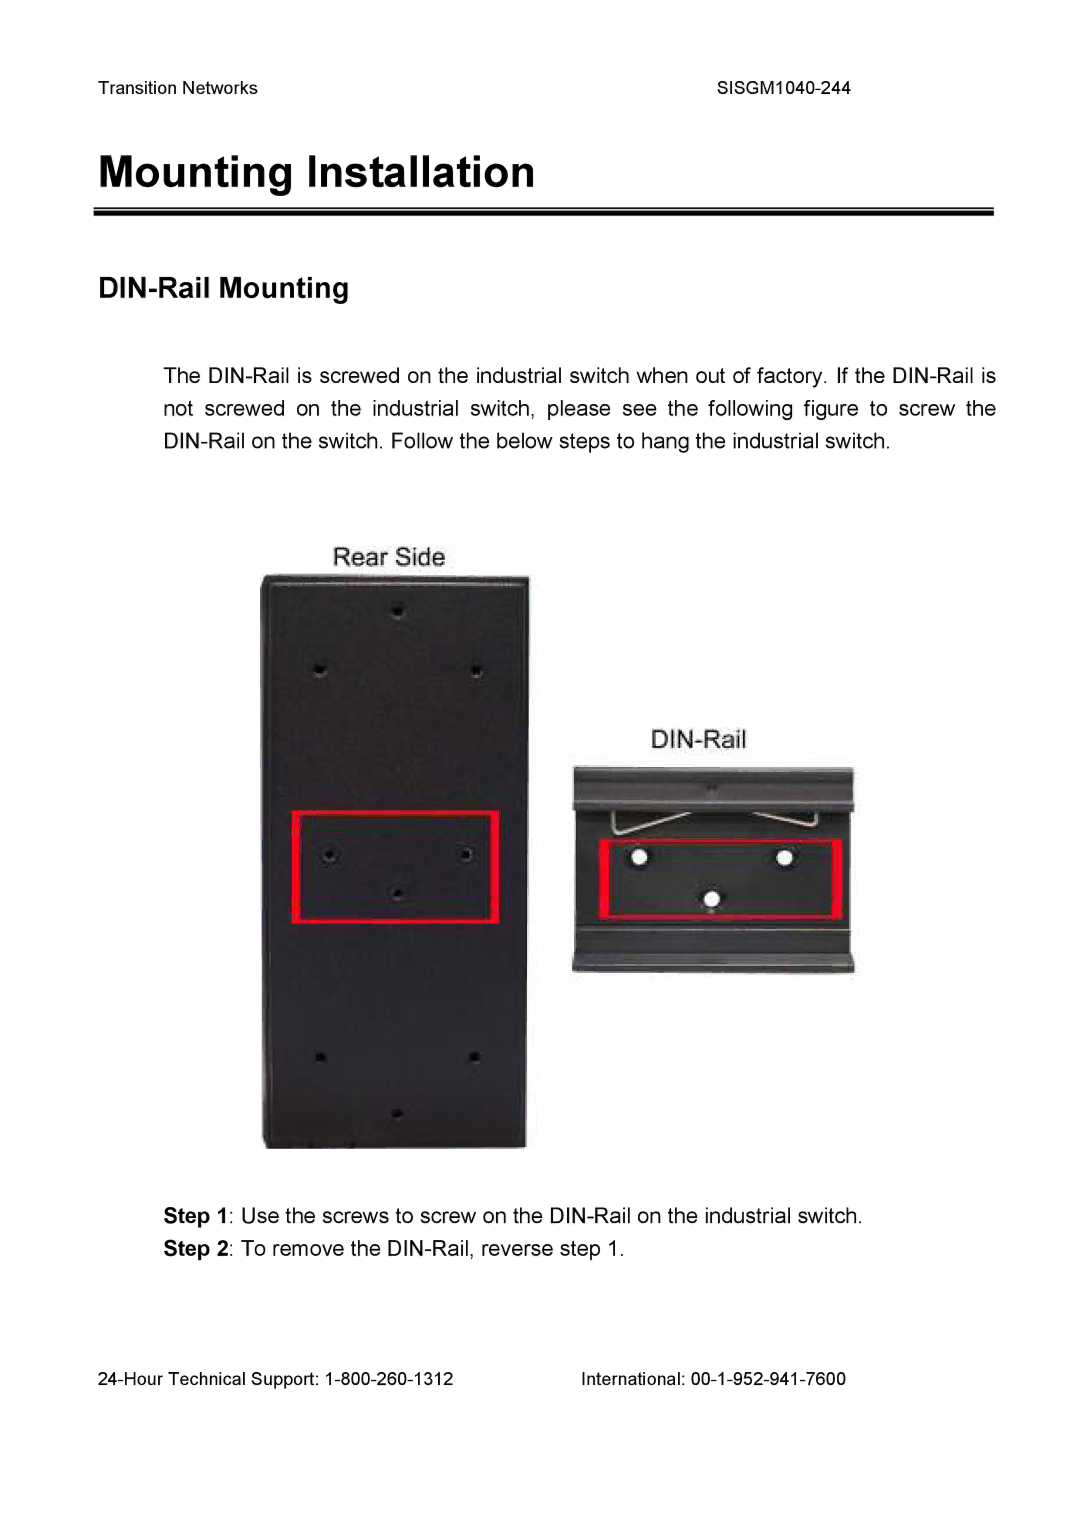 Transition Networks SISGM1040-244 user manual Mounting Installation, DIN-Rail Mounting 